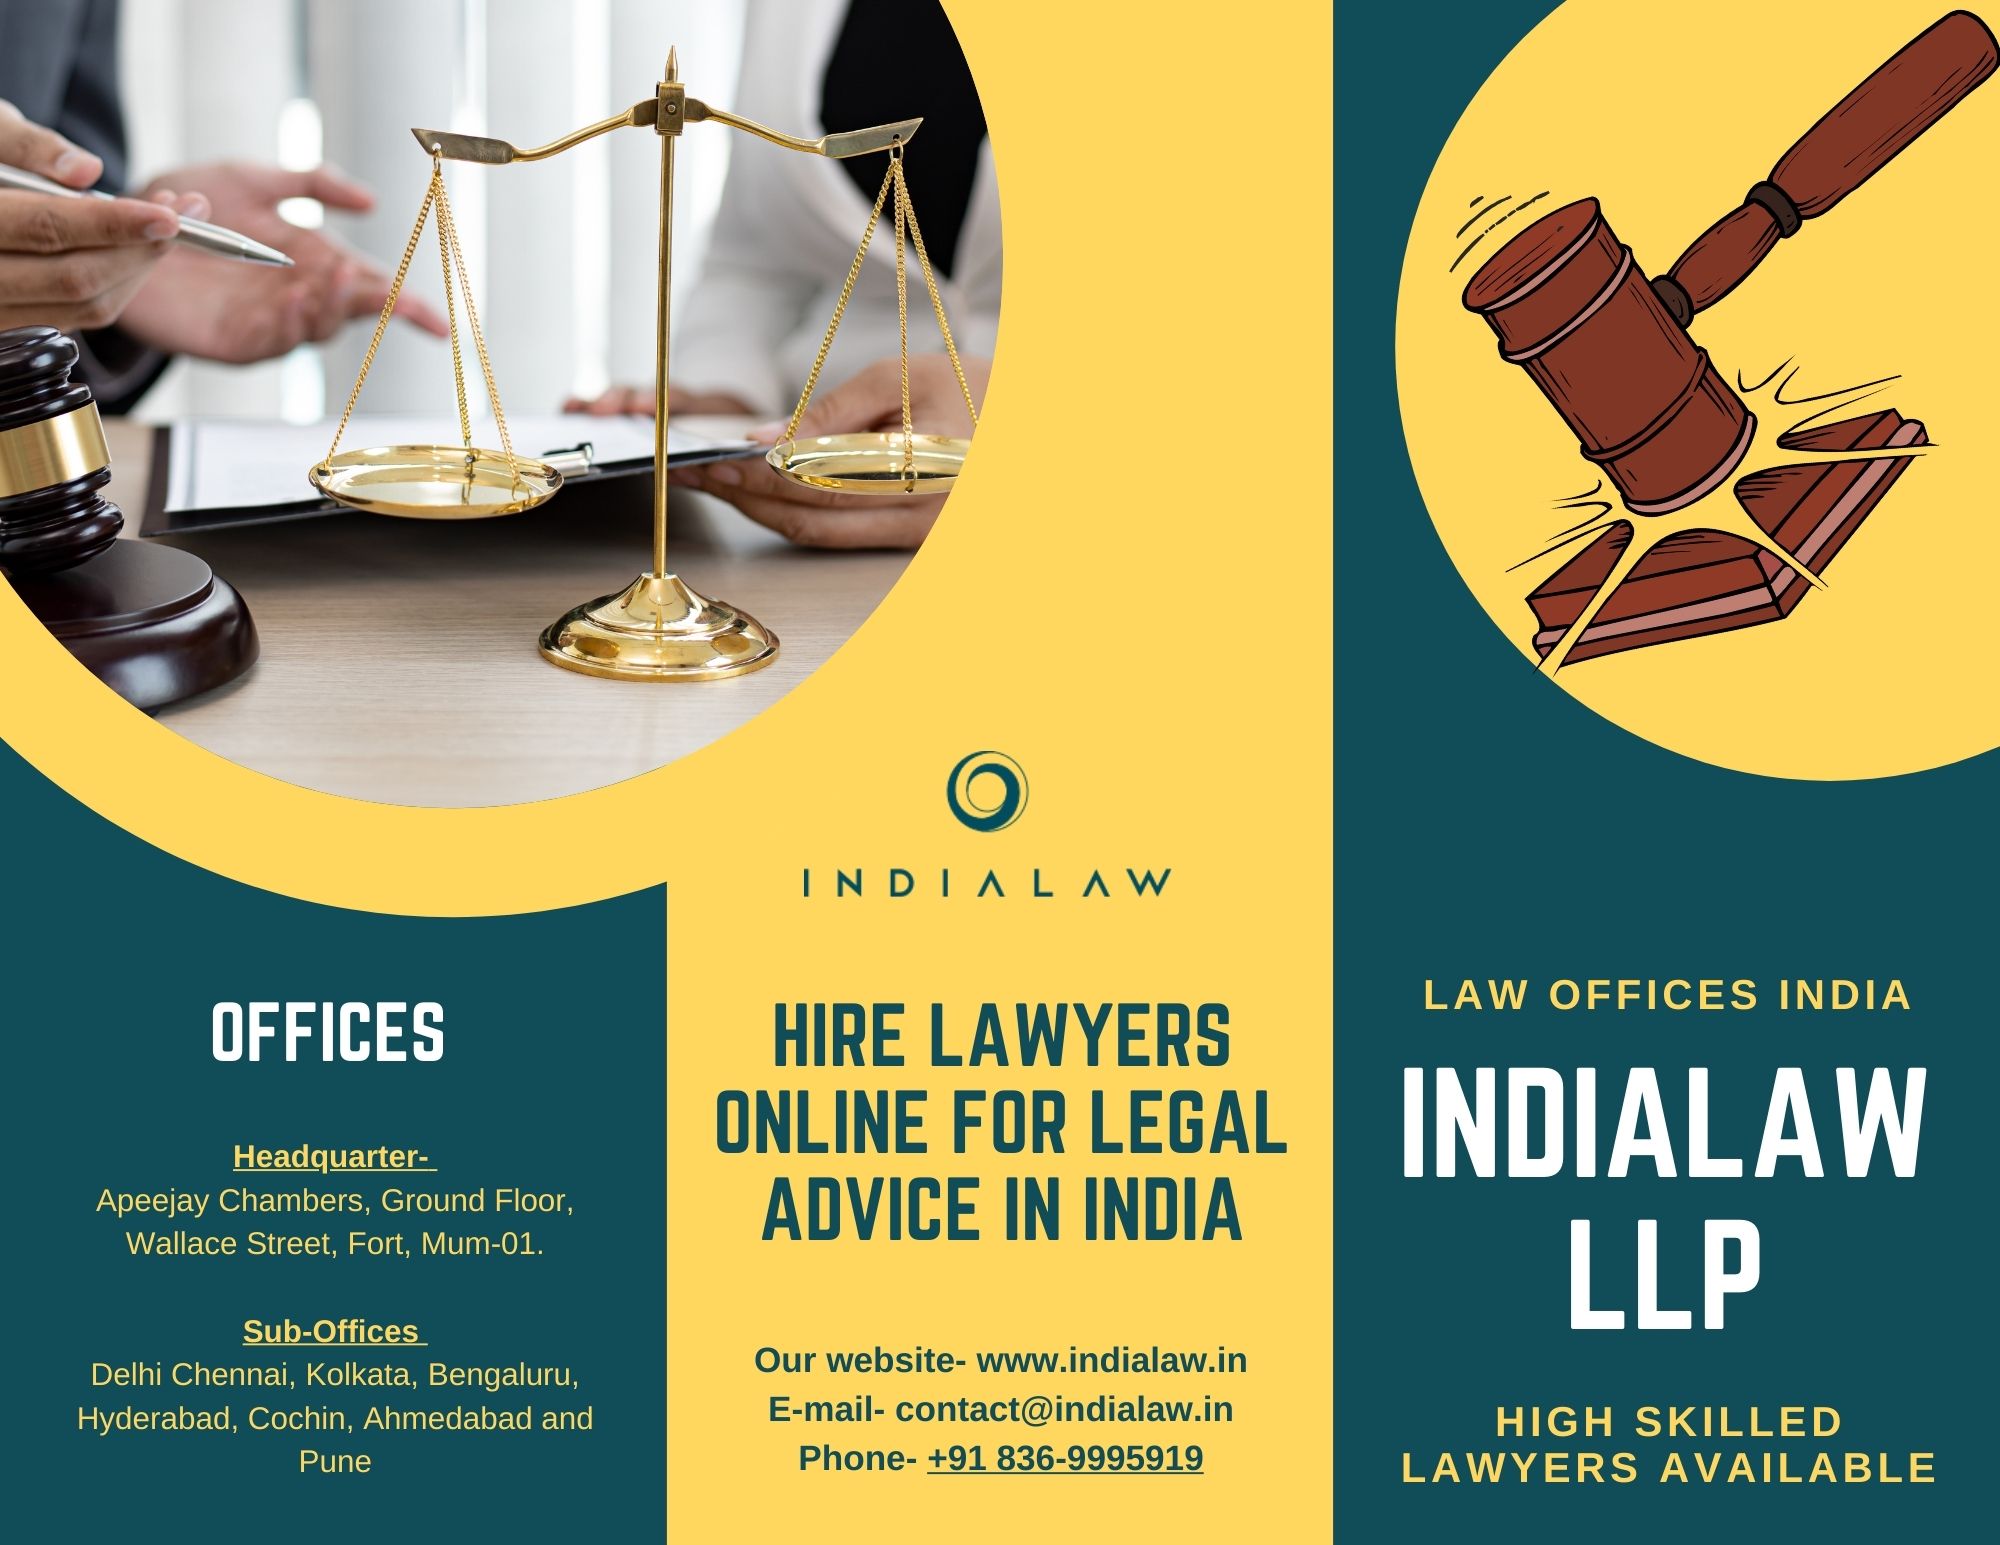 IndiaLaw LLP| Pan India Law Firm